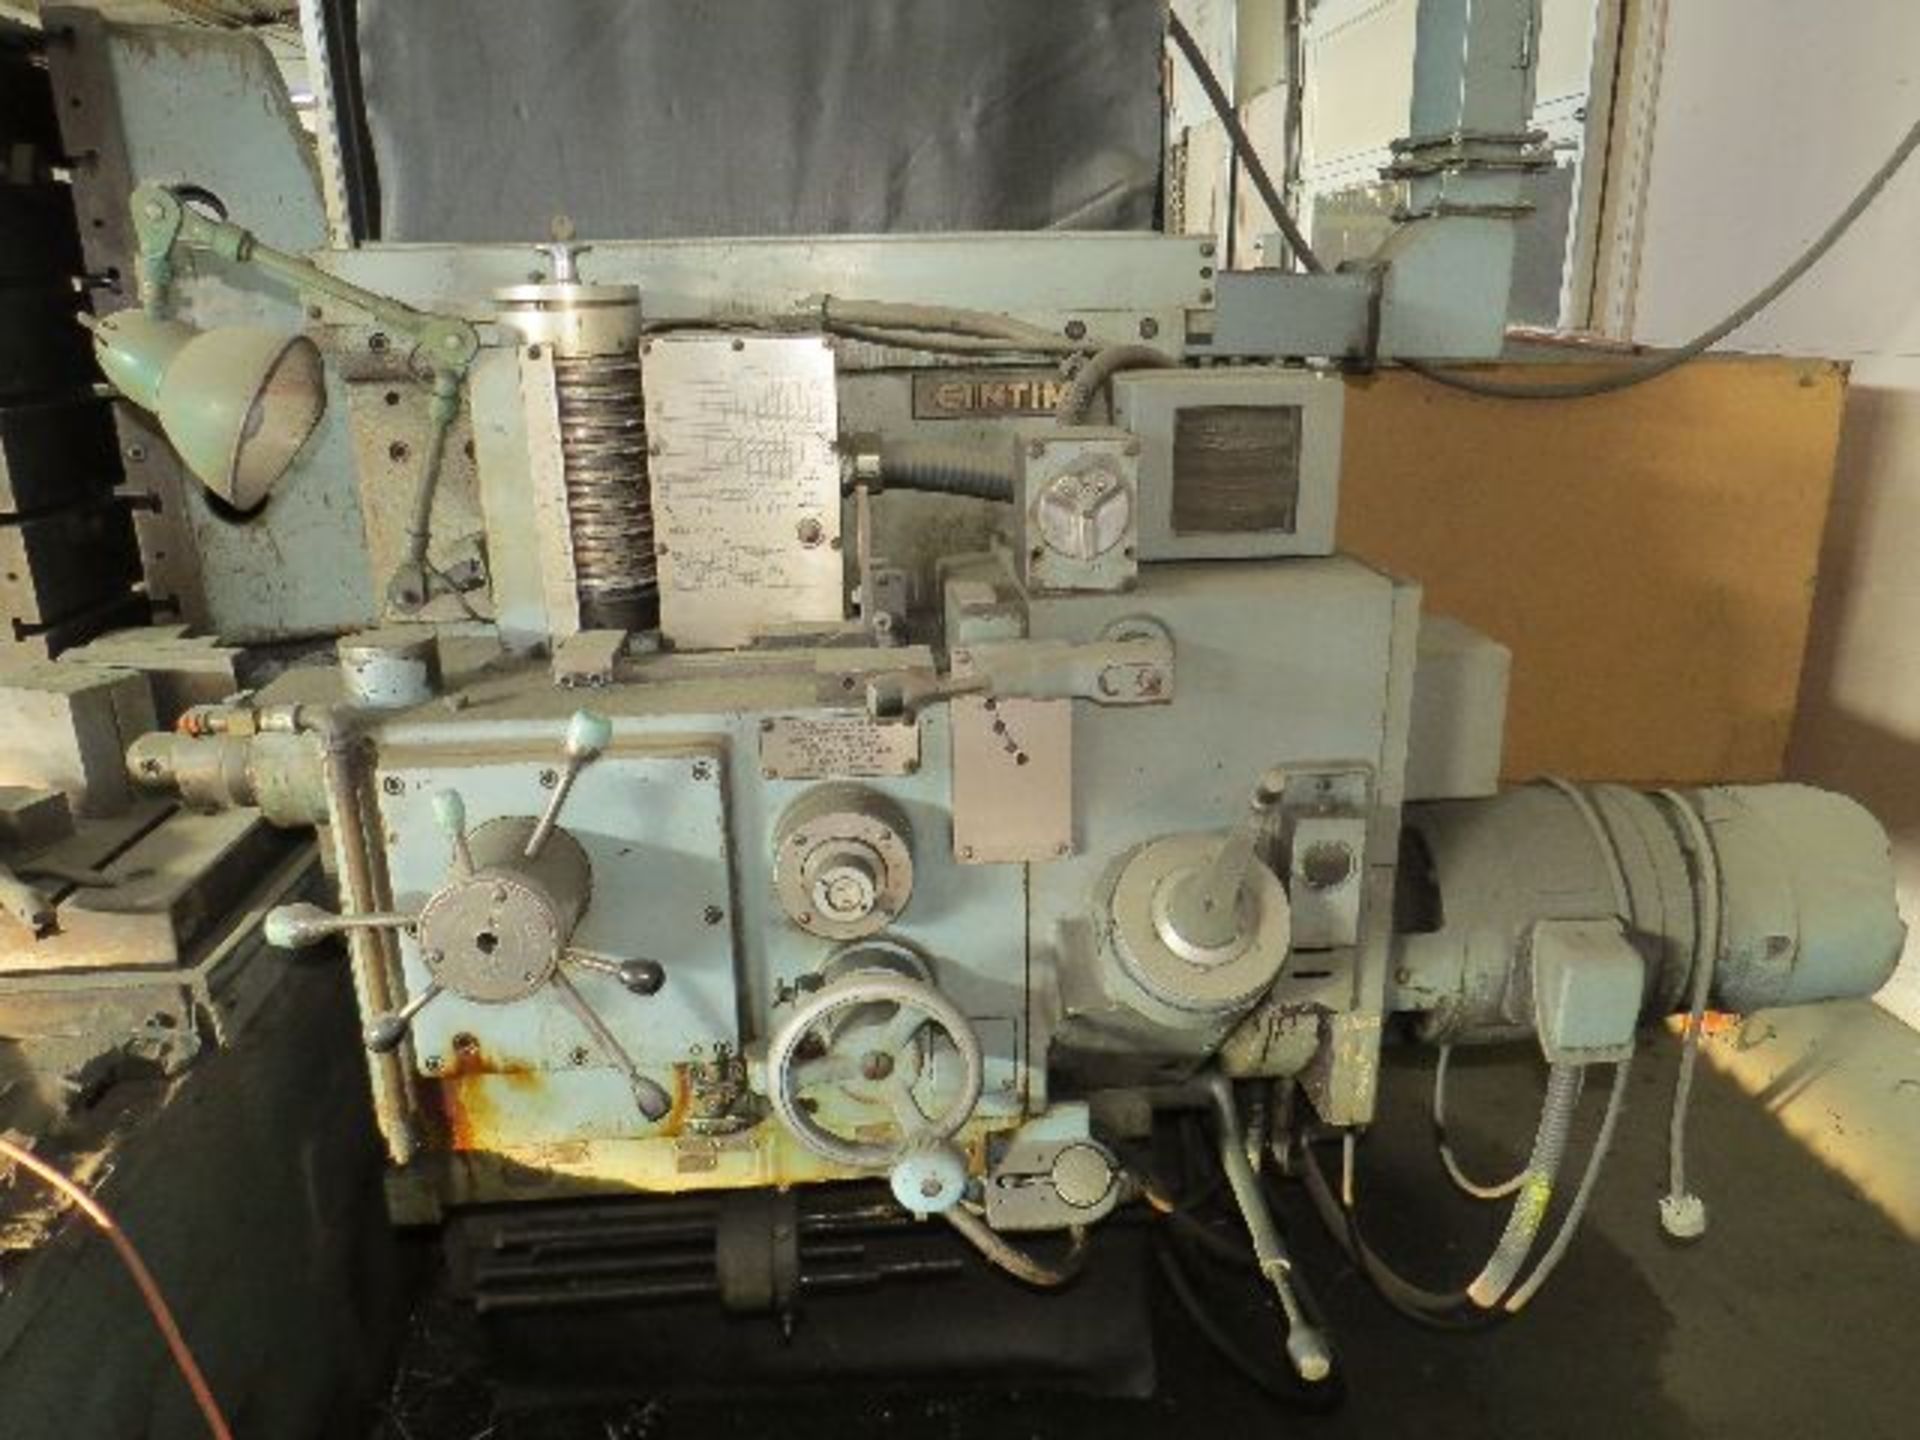 Cintimatic horz.boring mill , 40"x100" travel. S/N 55131H55H-0005.  Location - Waterloo, IA - Image 3 of 10